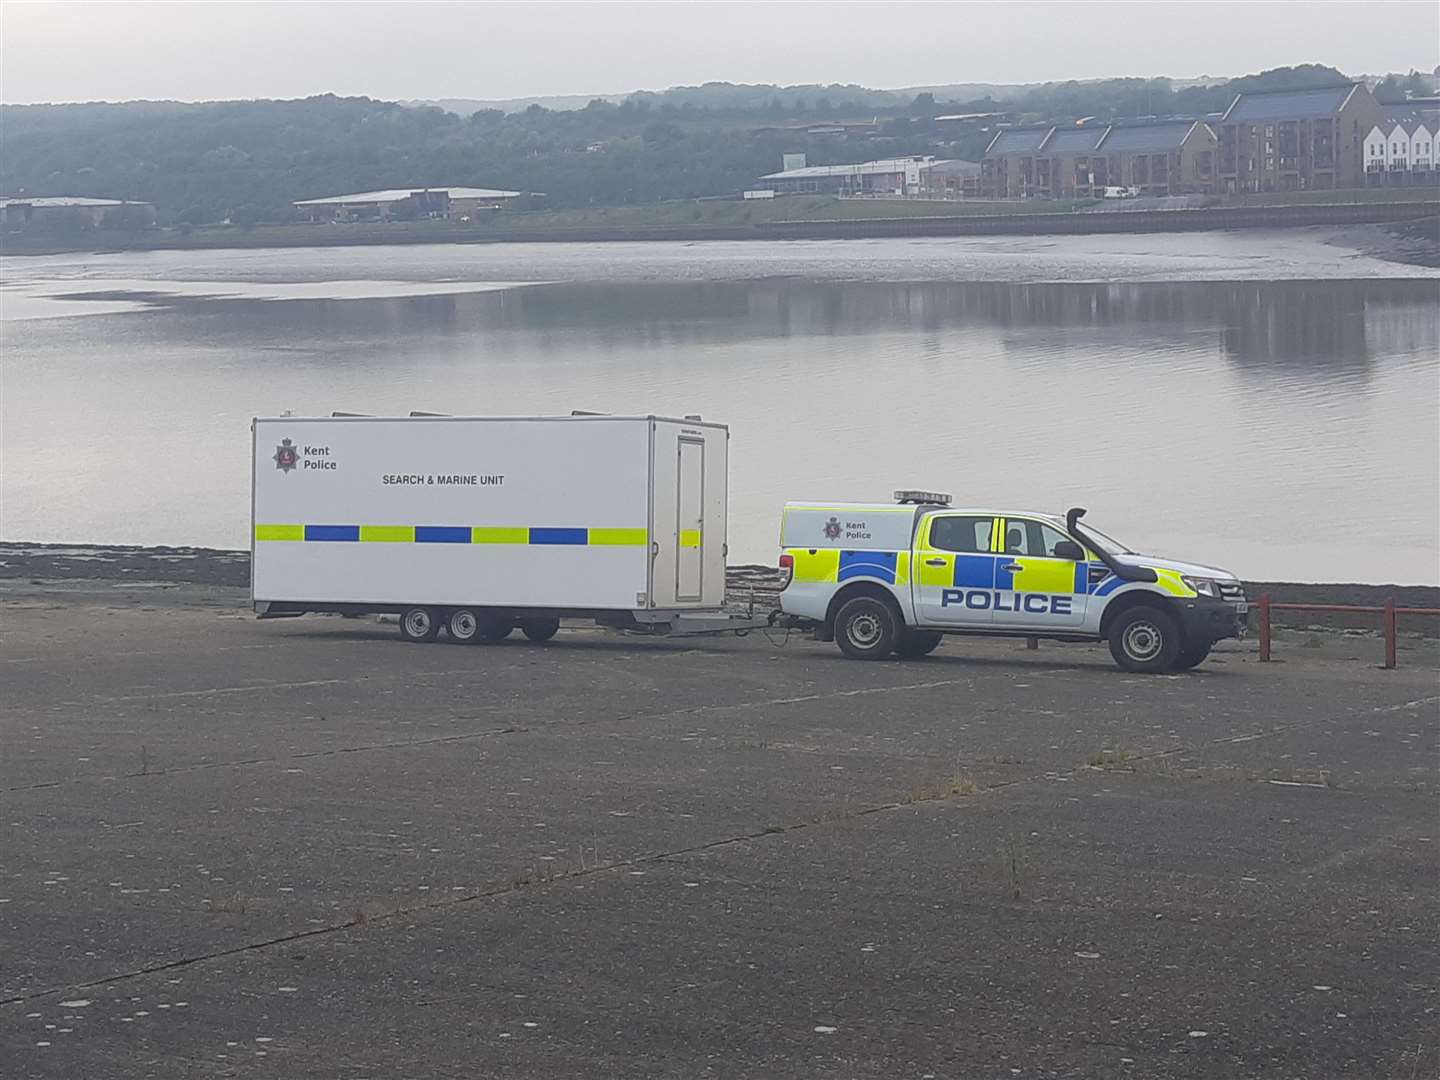 A police search and marine unit is parked outside Medway Rowing Club on Friday, August 2 (14650144)